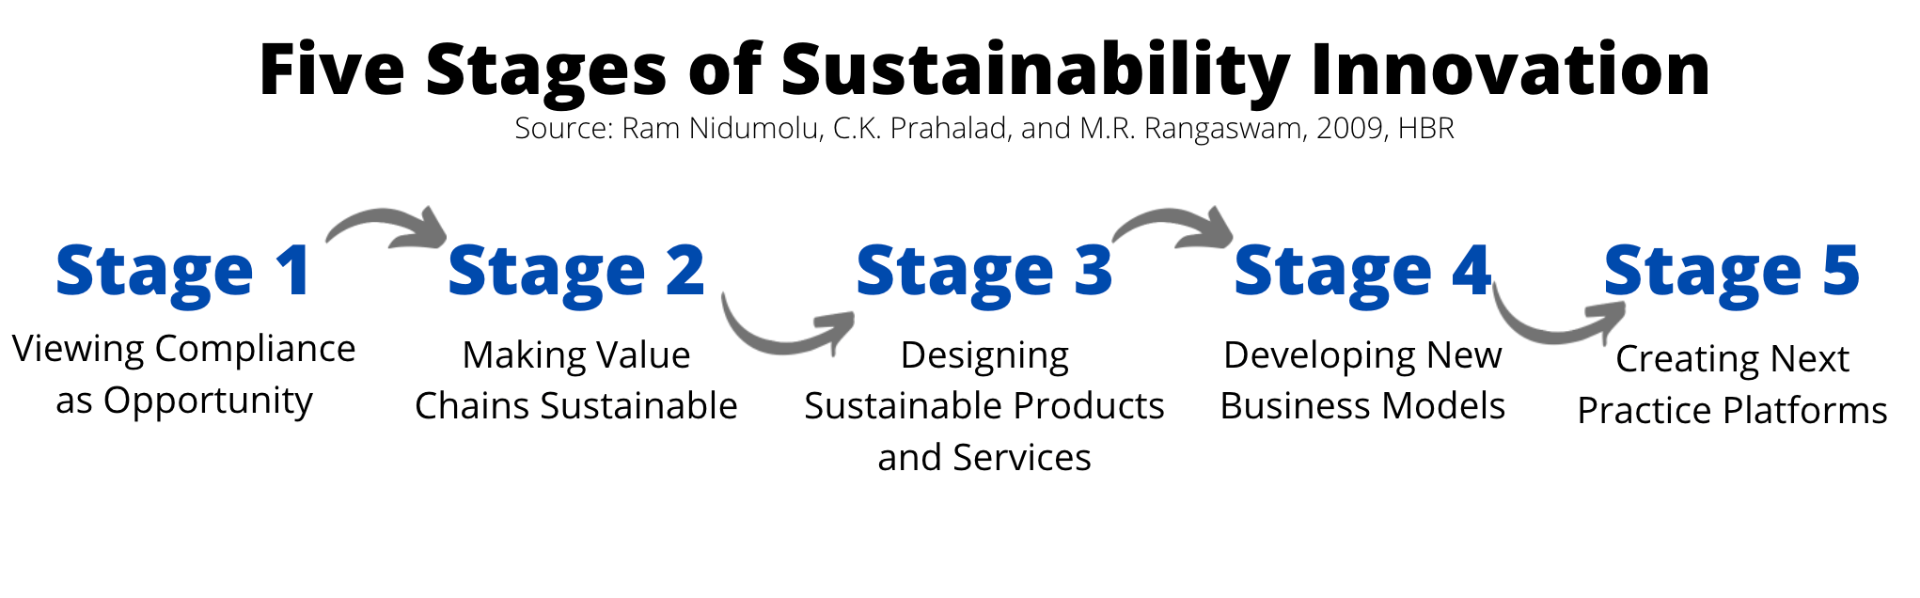 Five Stages of Sustainability Innovation